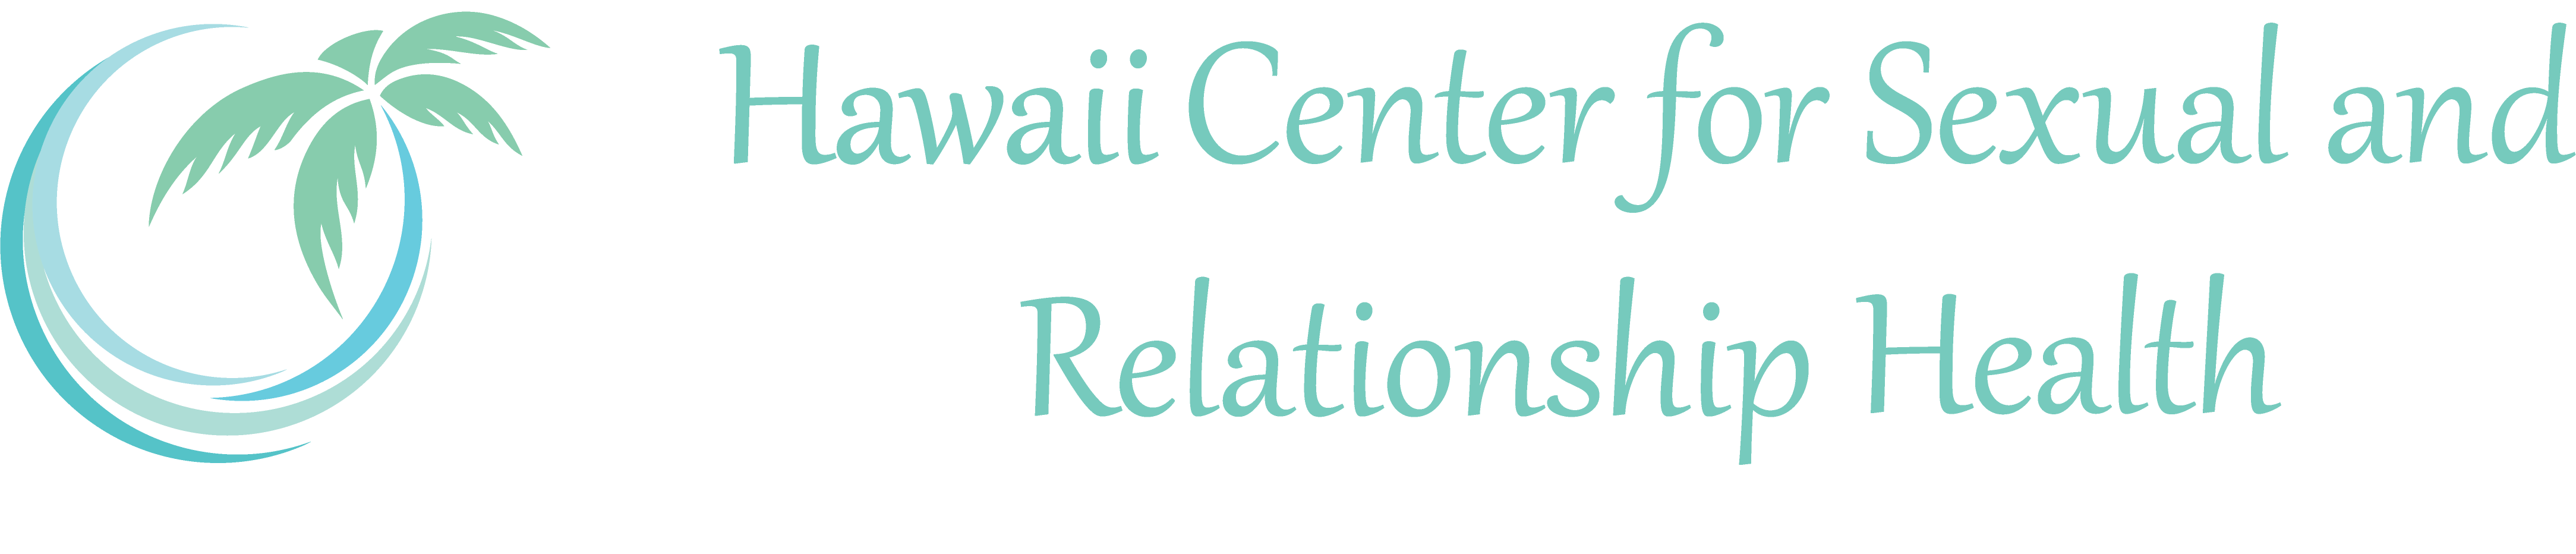 Hawaii Center for Sexual and Relationship Health